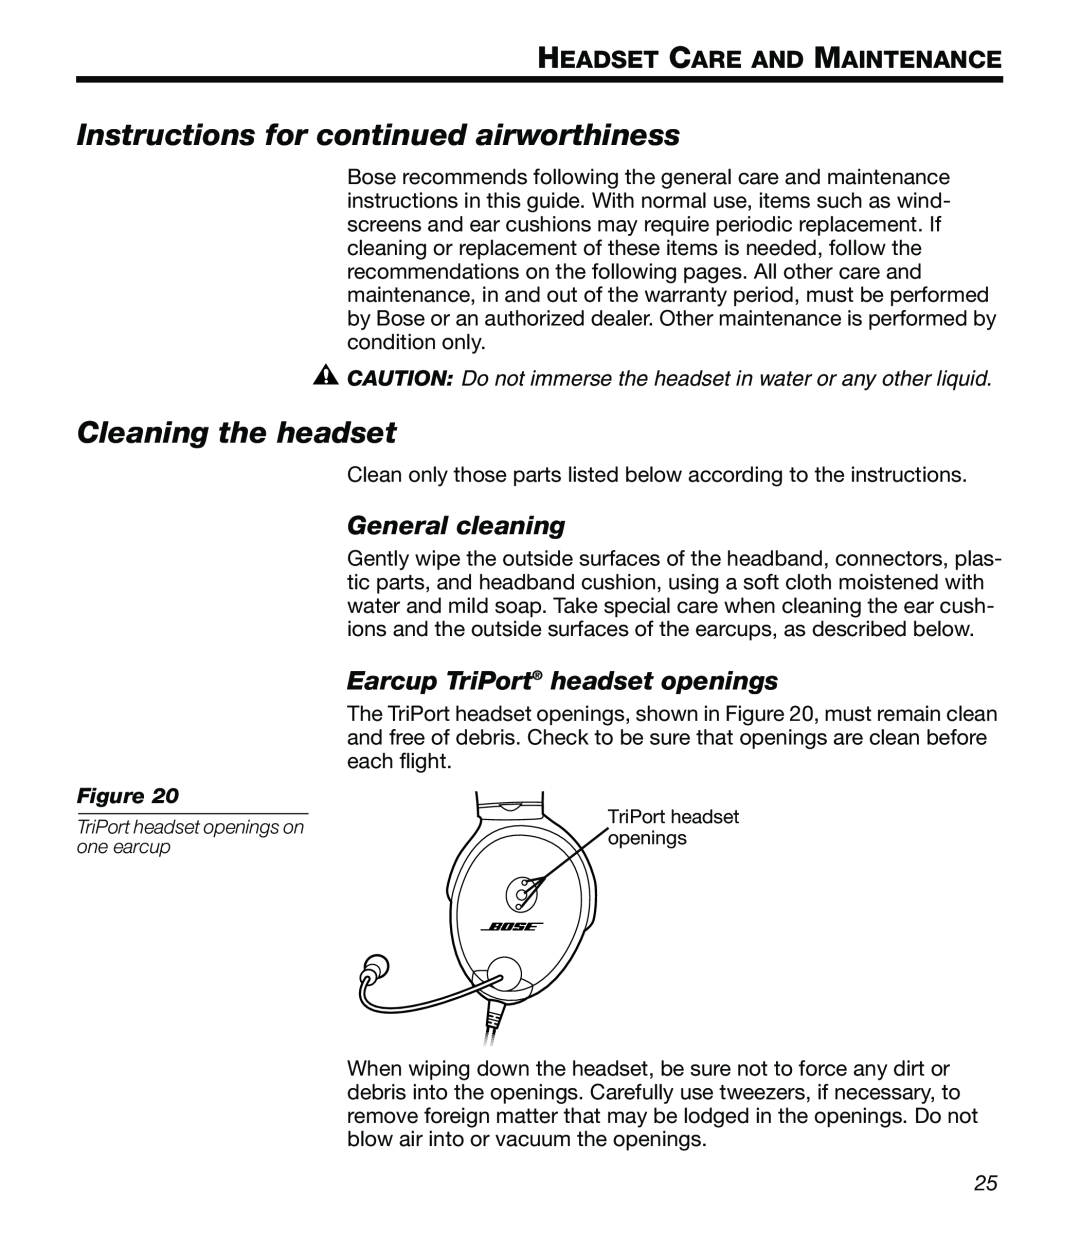 Bose X Instructions for continued airworthiness, Cleaning the headset, General cleaning, Earcup TriPort headset openings 